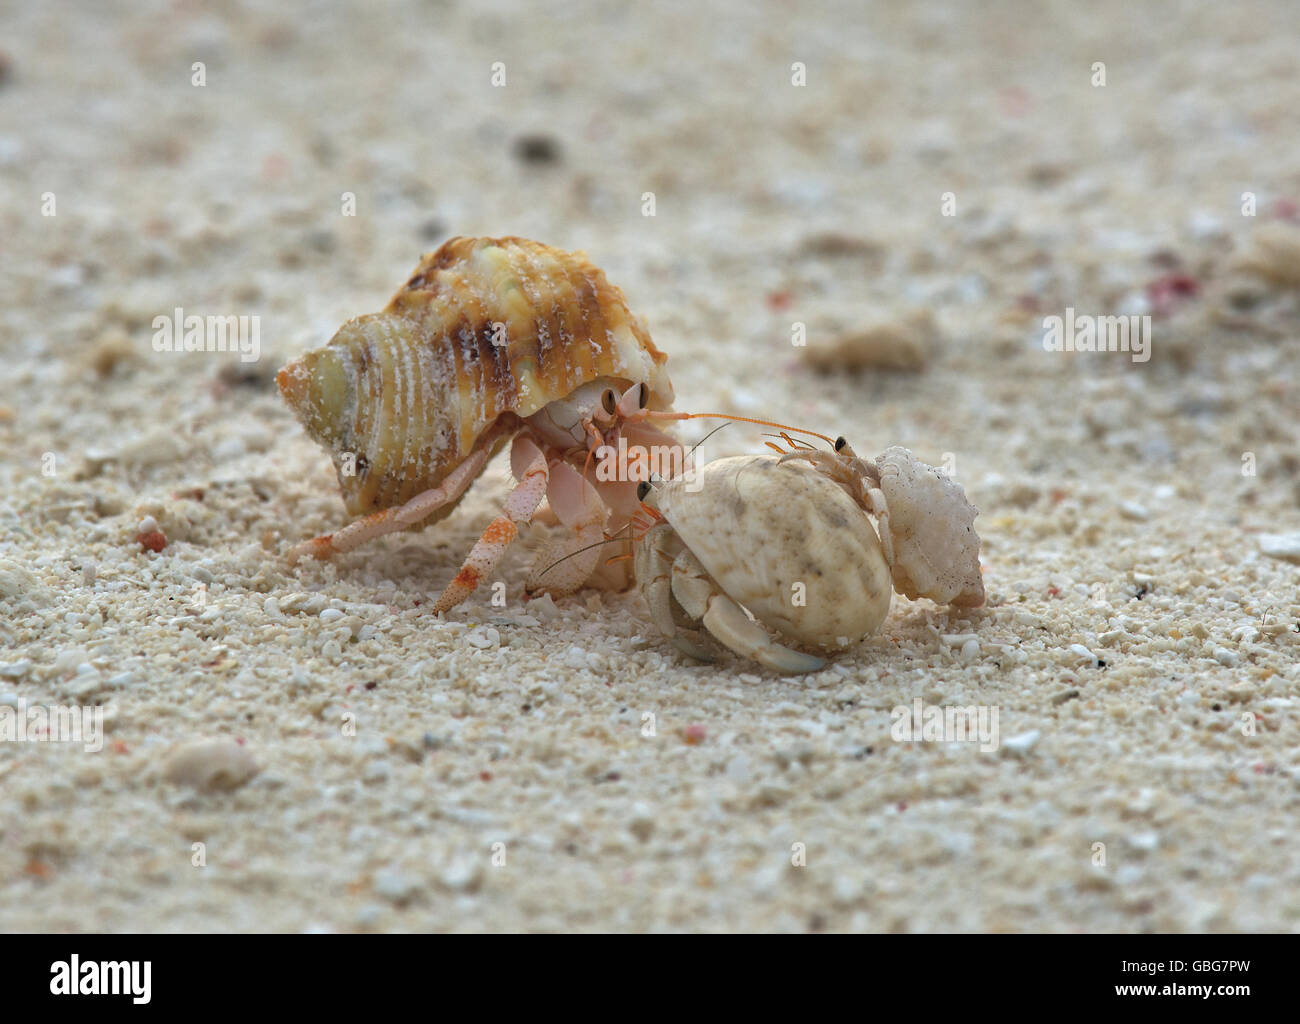 Three Hermit crabs, decapod crustaceans, meeting on a beach in the Maldives, Indian Ocean Stock Photo